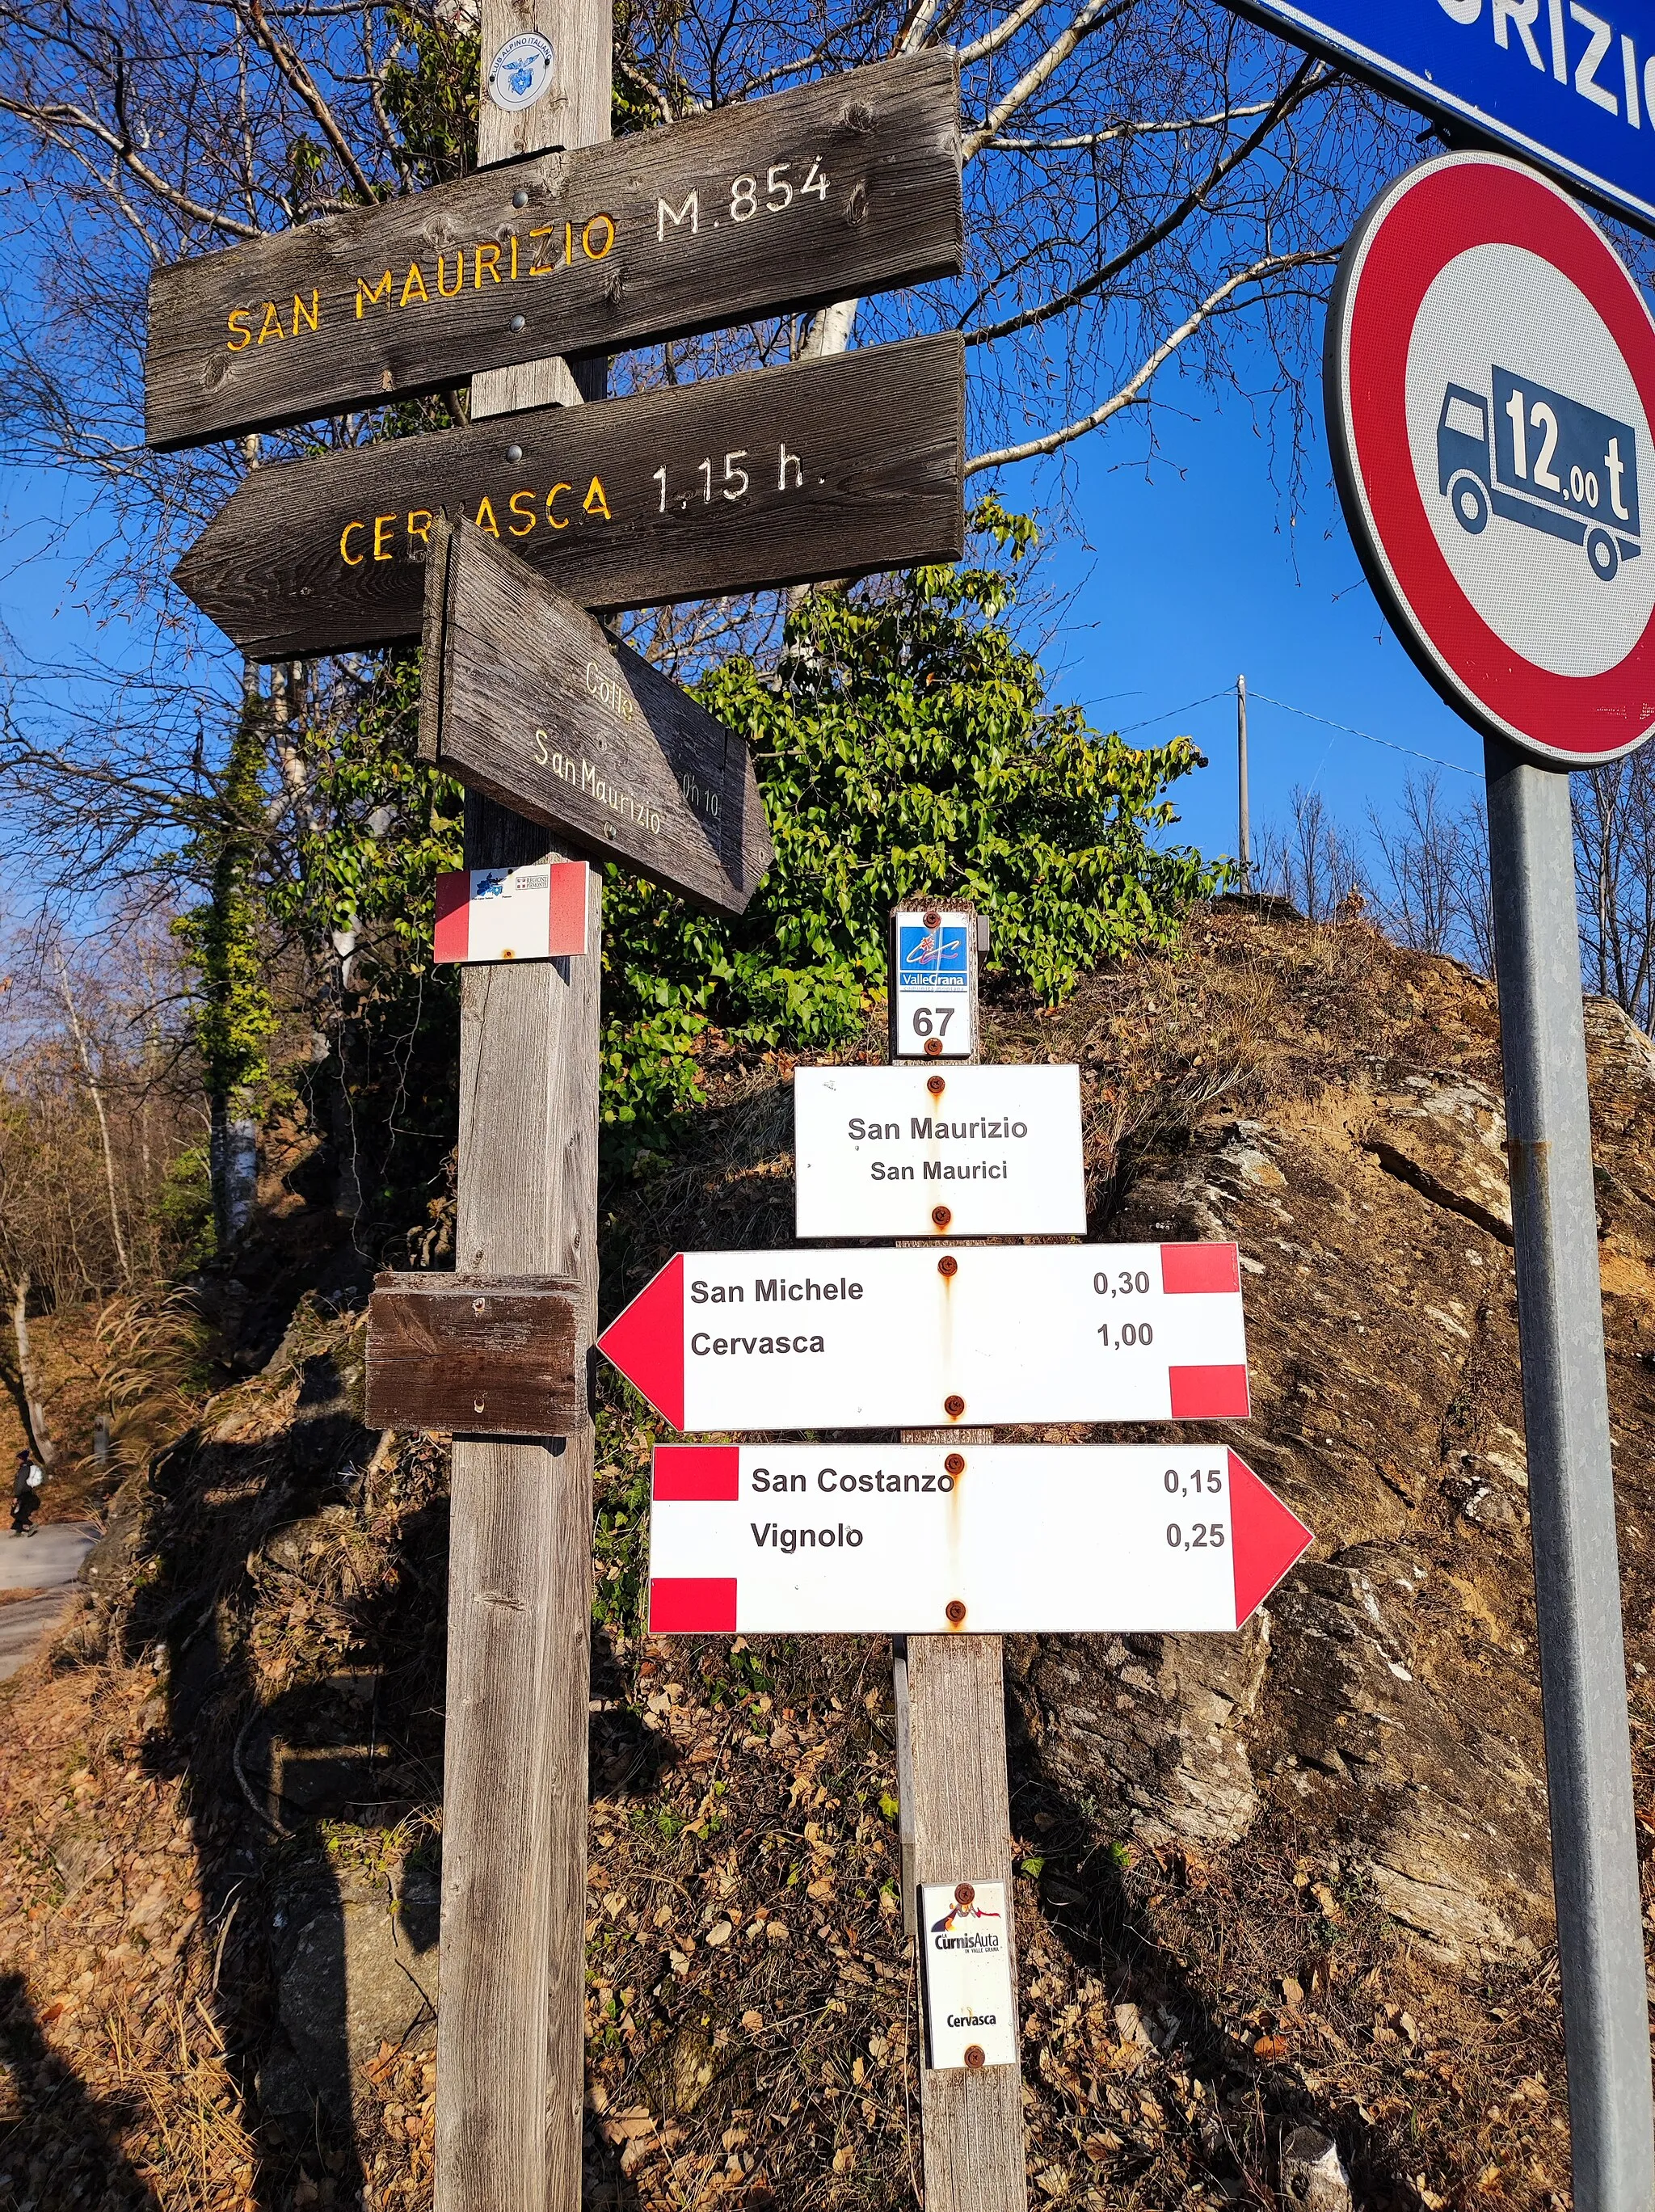 Photo showing: Guidepost in San Maurizio, Cervasca, Italy